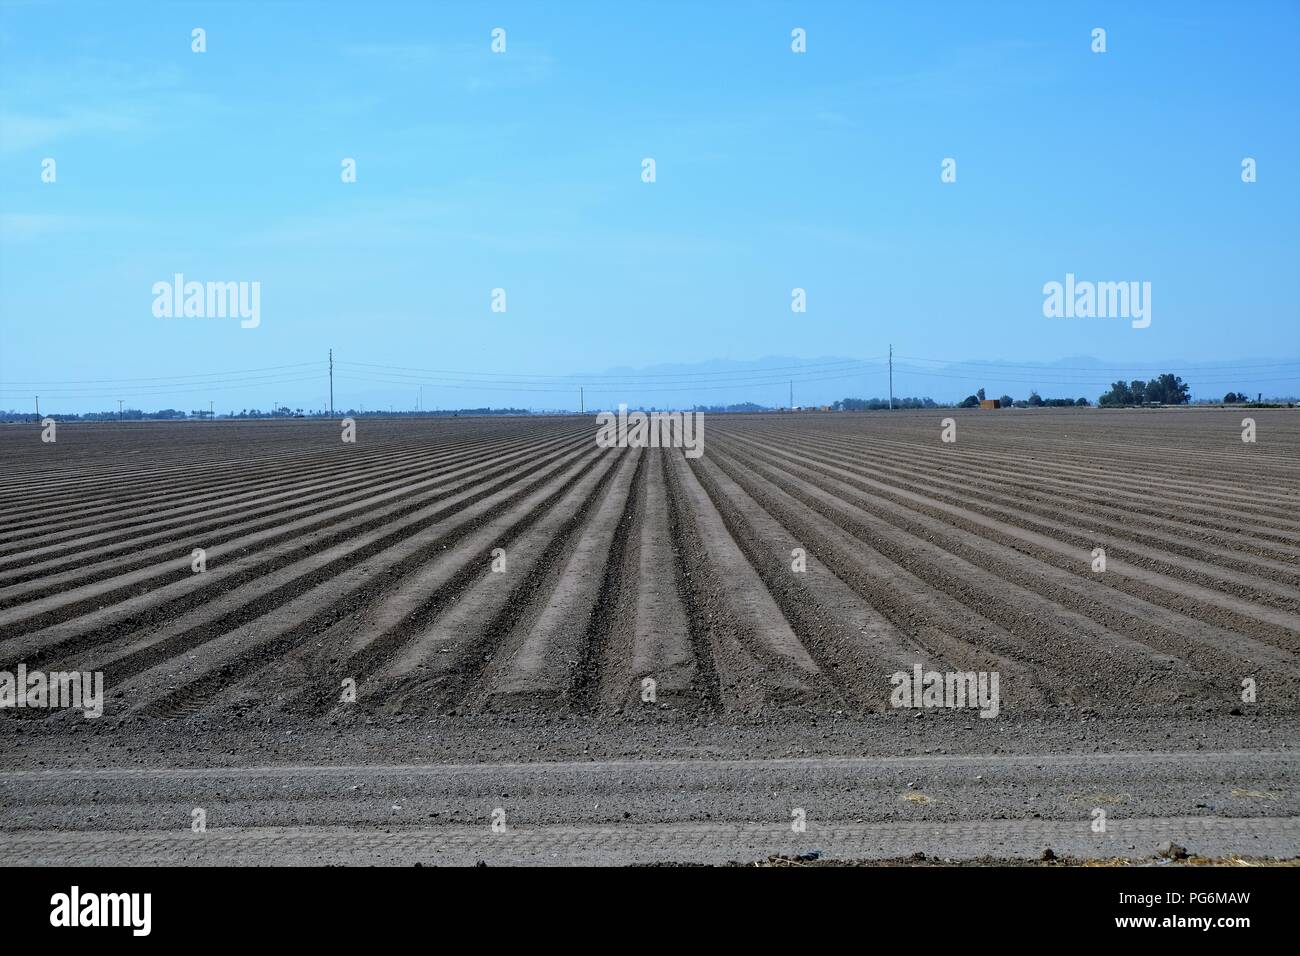 Field prepared for sowing in Imperial County, California, USA. Stock Photo